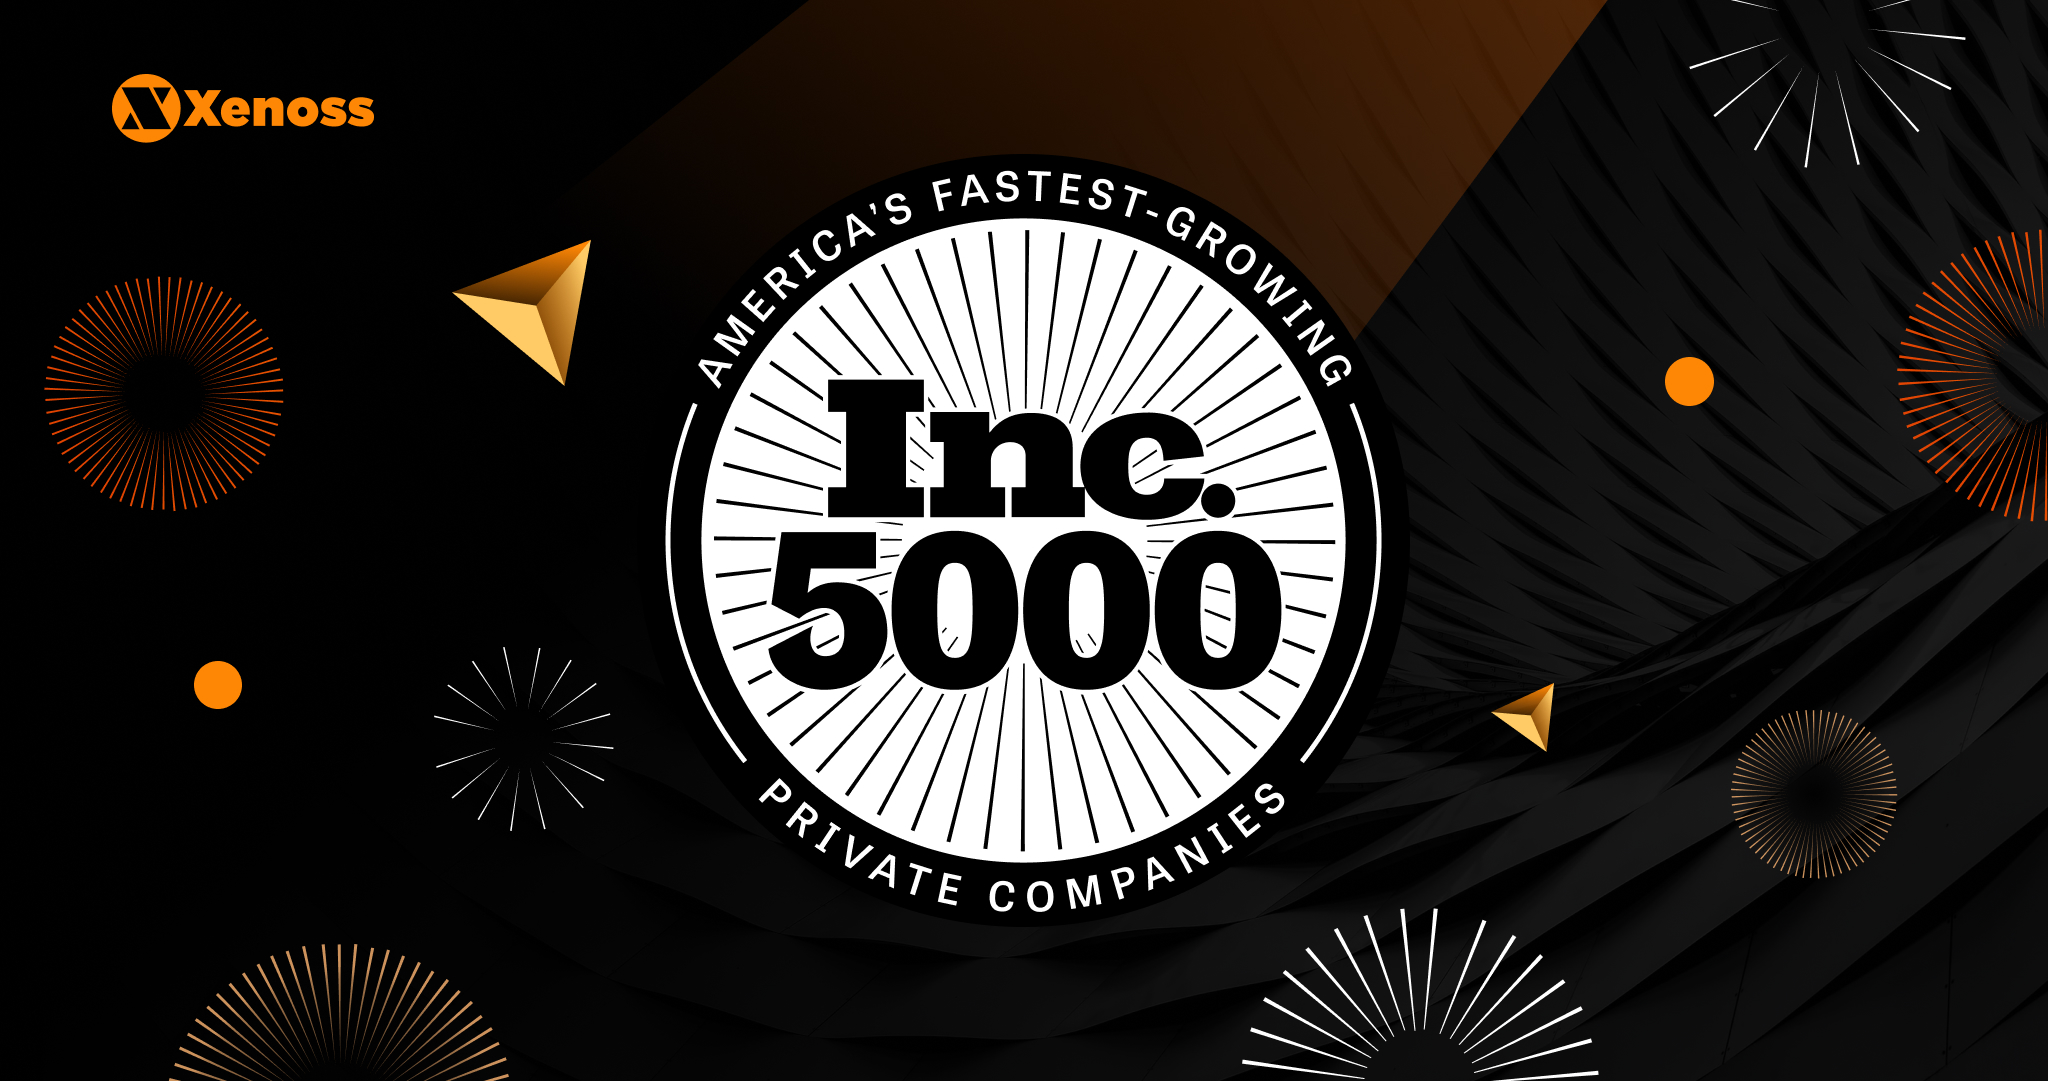 Xenoss is in top 100 fastest-growing software companies the Inc. 5000 list | Xenoss News